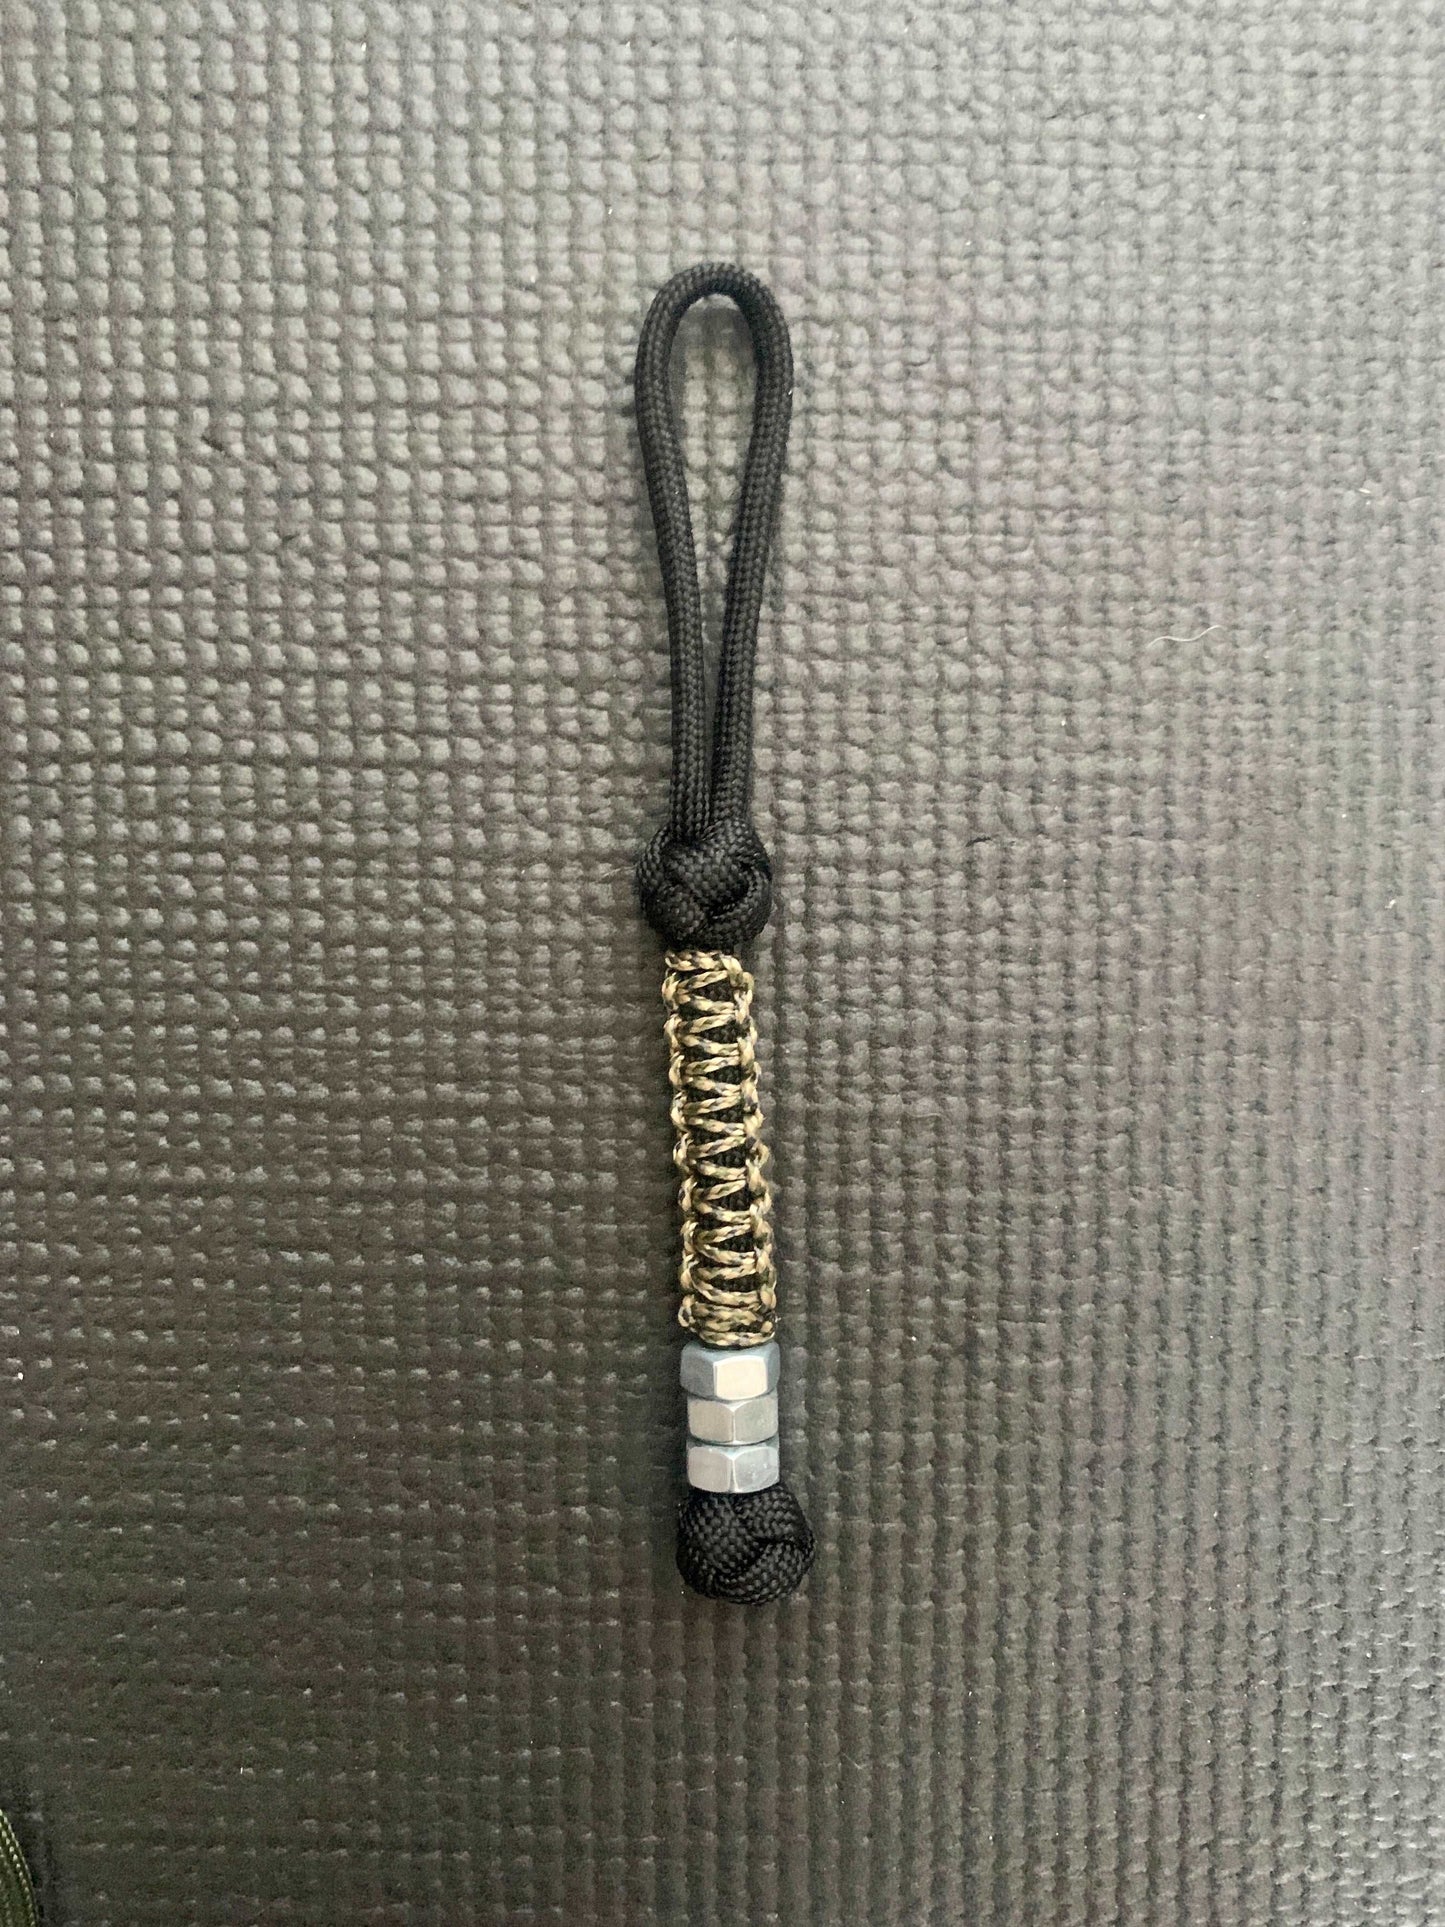 Cobra Knot Lanyards with Steel Hex Nuts